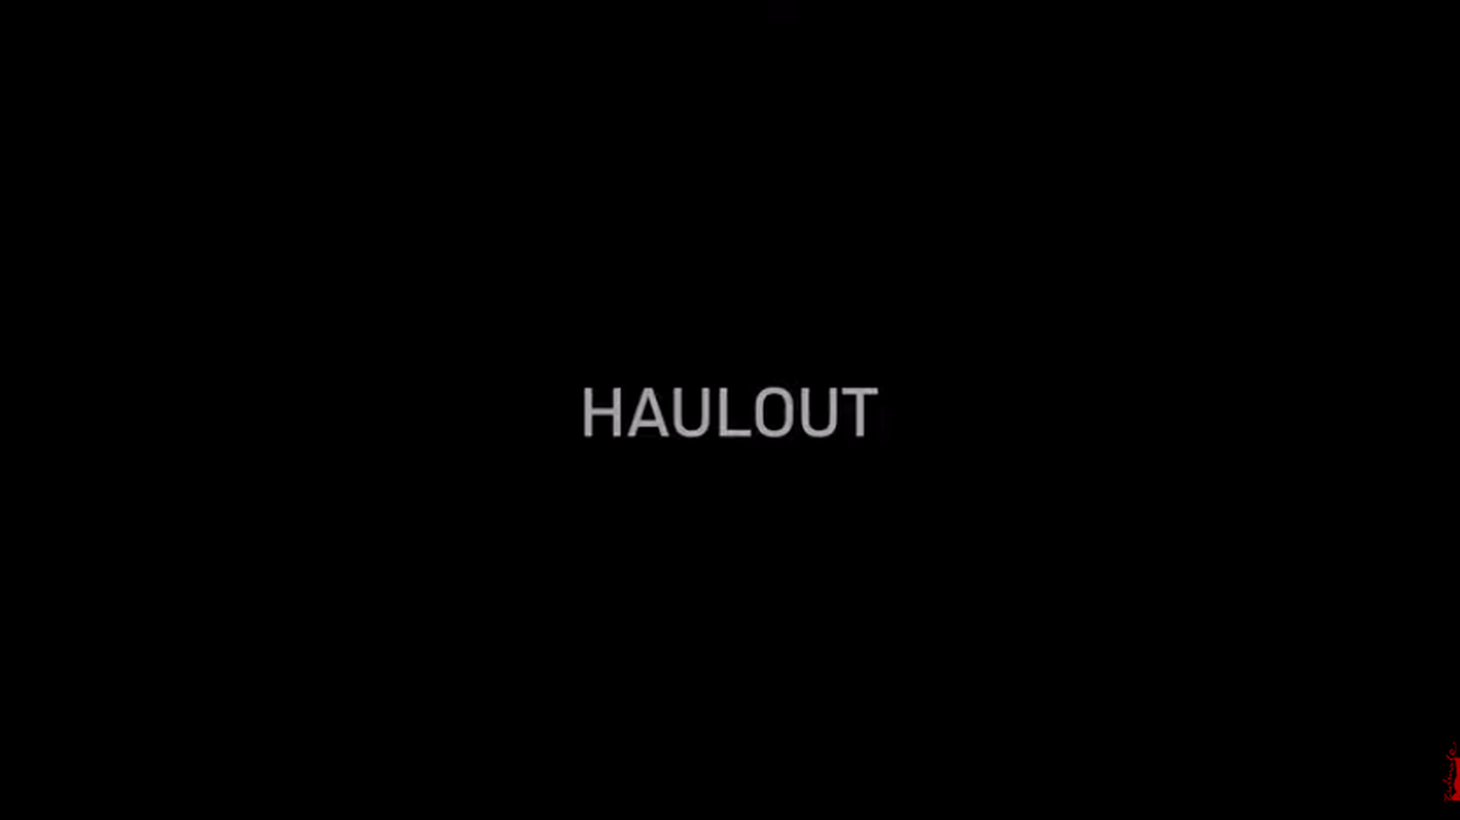 “Haulout” is one of five contenders for Best Documentary Short Film at this year’s Academy Awards.